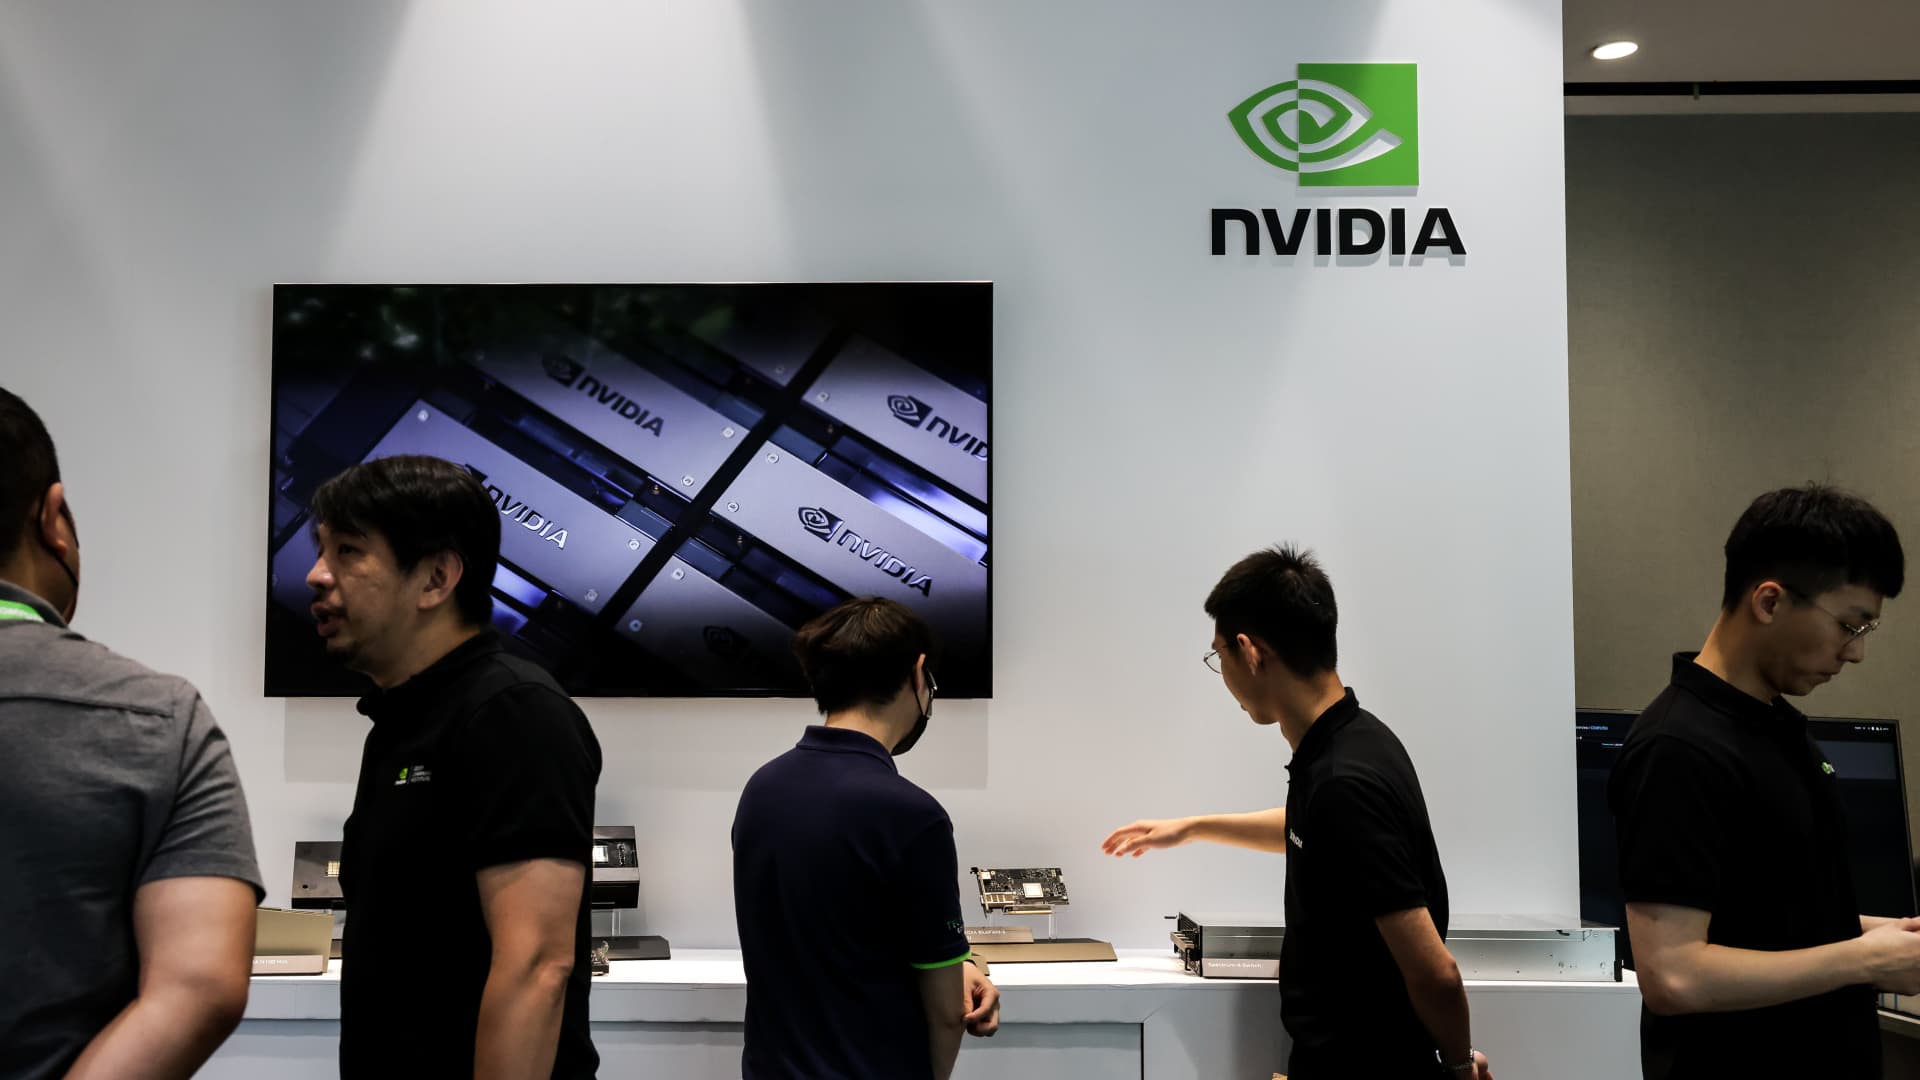 Don’t expect Nvidia’s rally to lose steam, Citi says